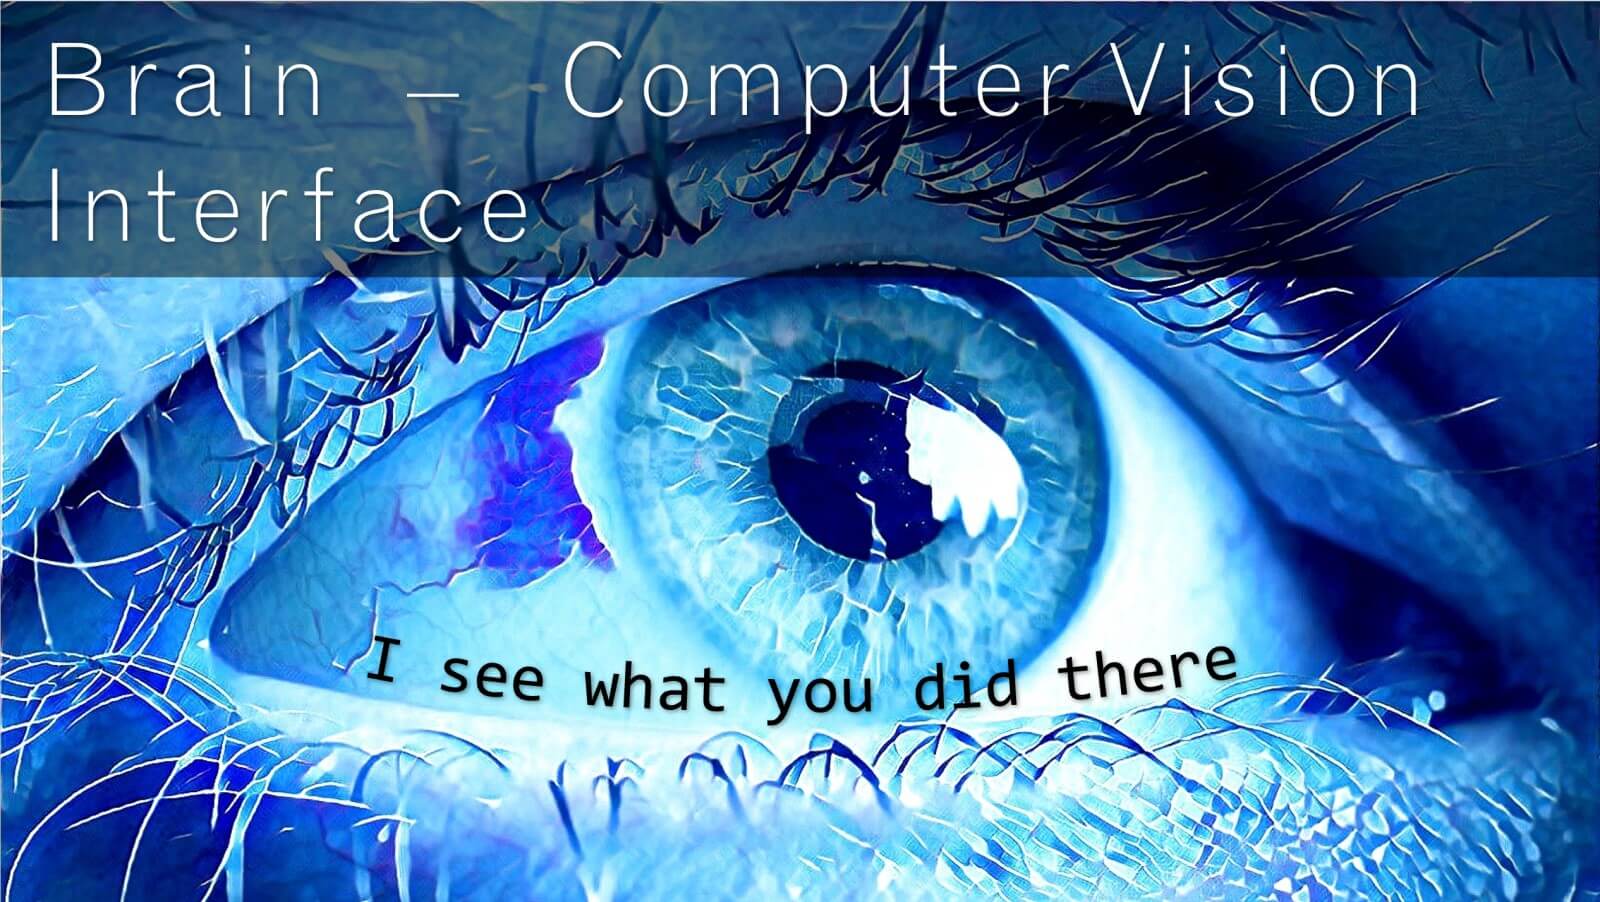 Brain – Computer Vision Interface: I see what you did there